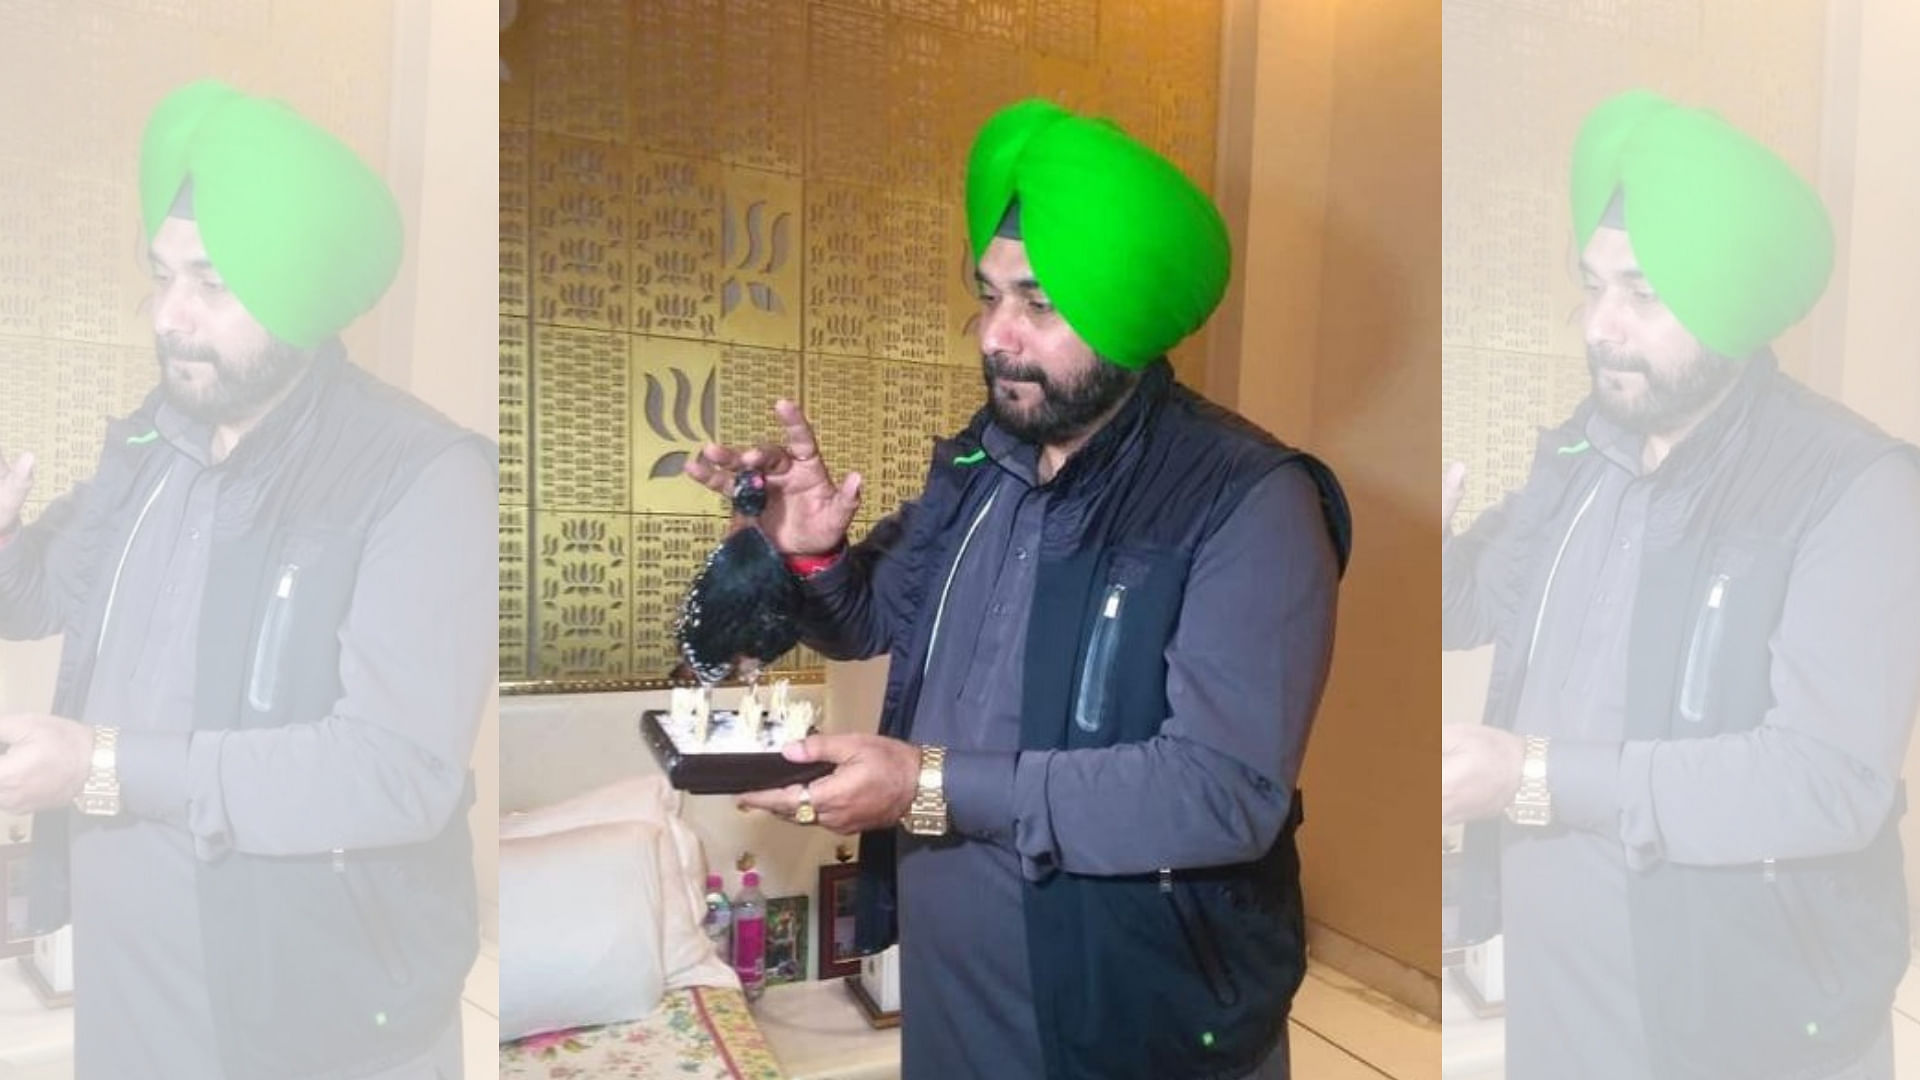 A complaint was registered with the Wildlife Crime Control Bureau (WCCB) against Navjot Singh Sidhu after he brought a stuffed Black Partridge from Pakistan without proper permit.